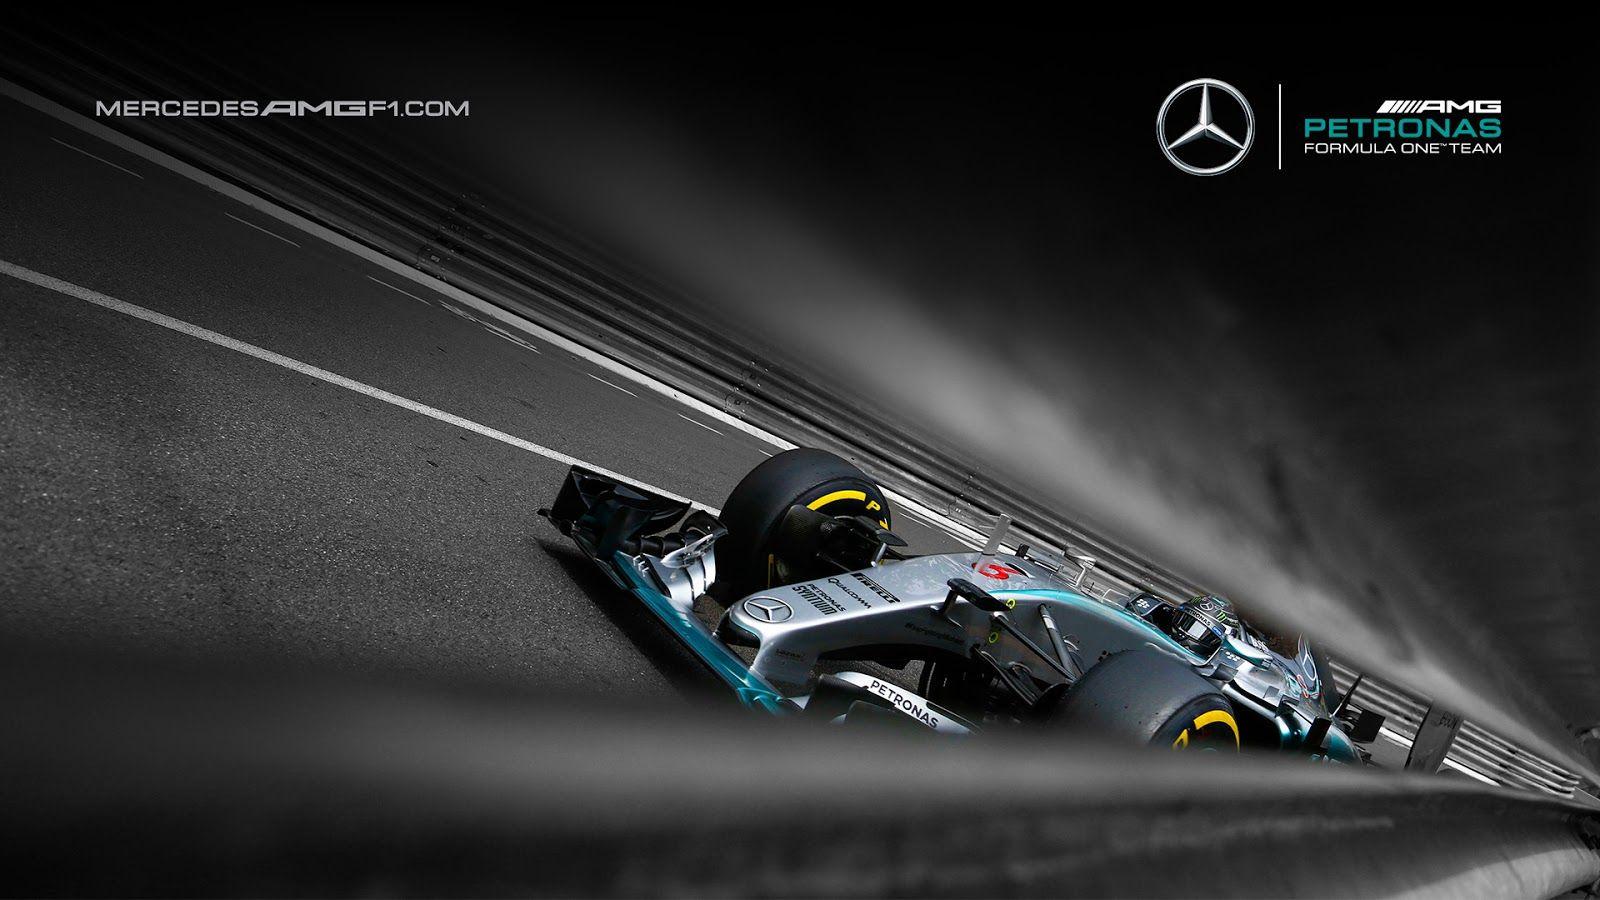 Mercedes Amg F1 Wallpapers Top Free Mercedes Amg F1 Backgrounds Wallpaperaccess